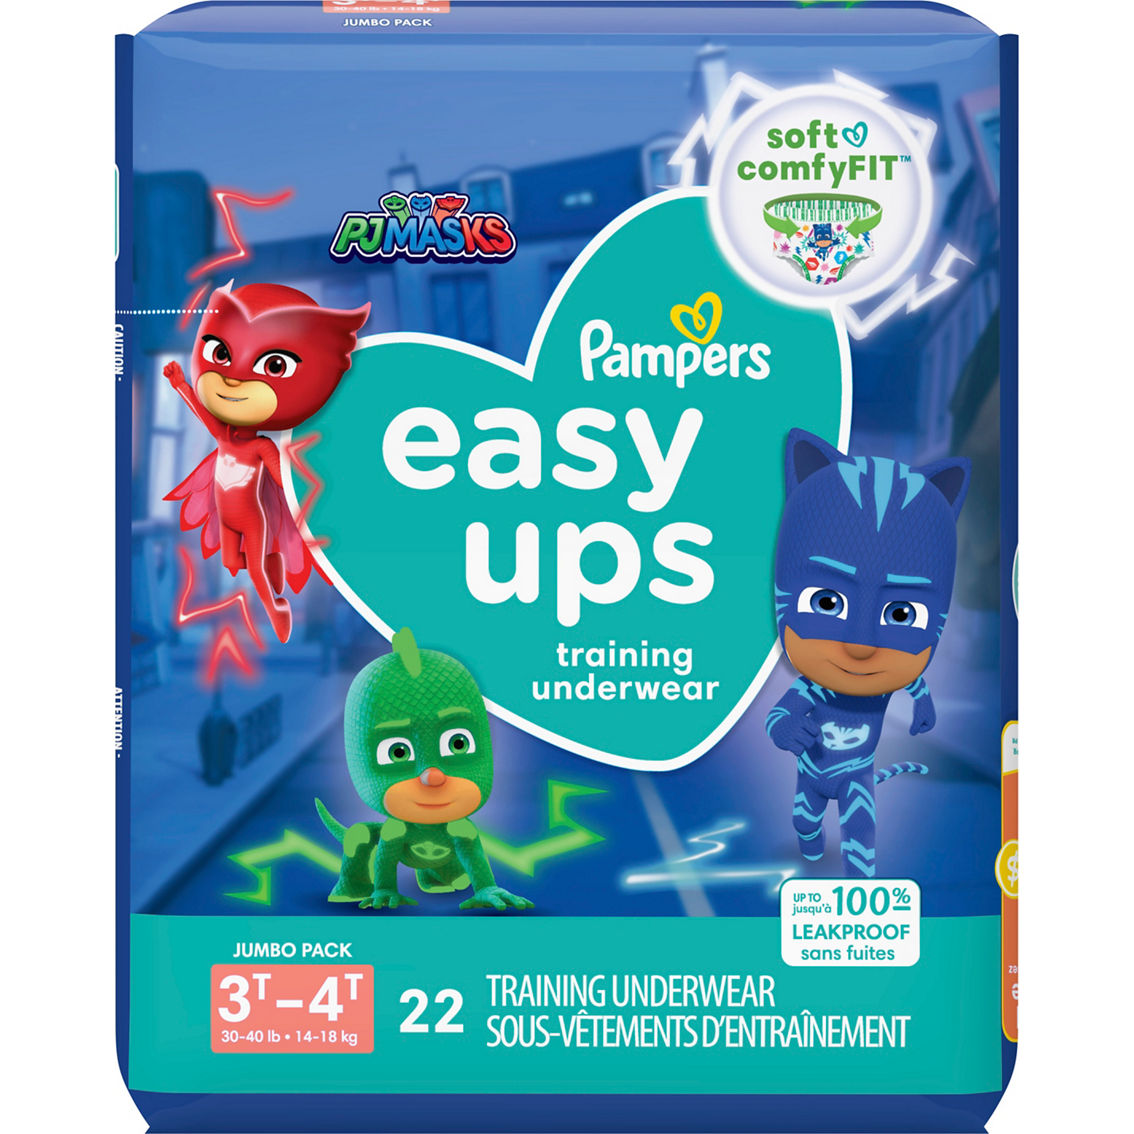 Pampers Boys Easy Ups Training Underwear Size 3t-4t (30-40 Lb.) 66